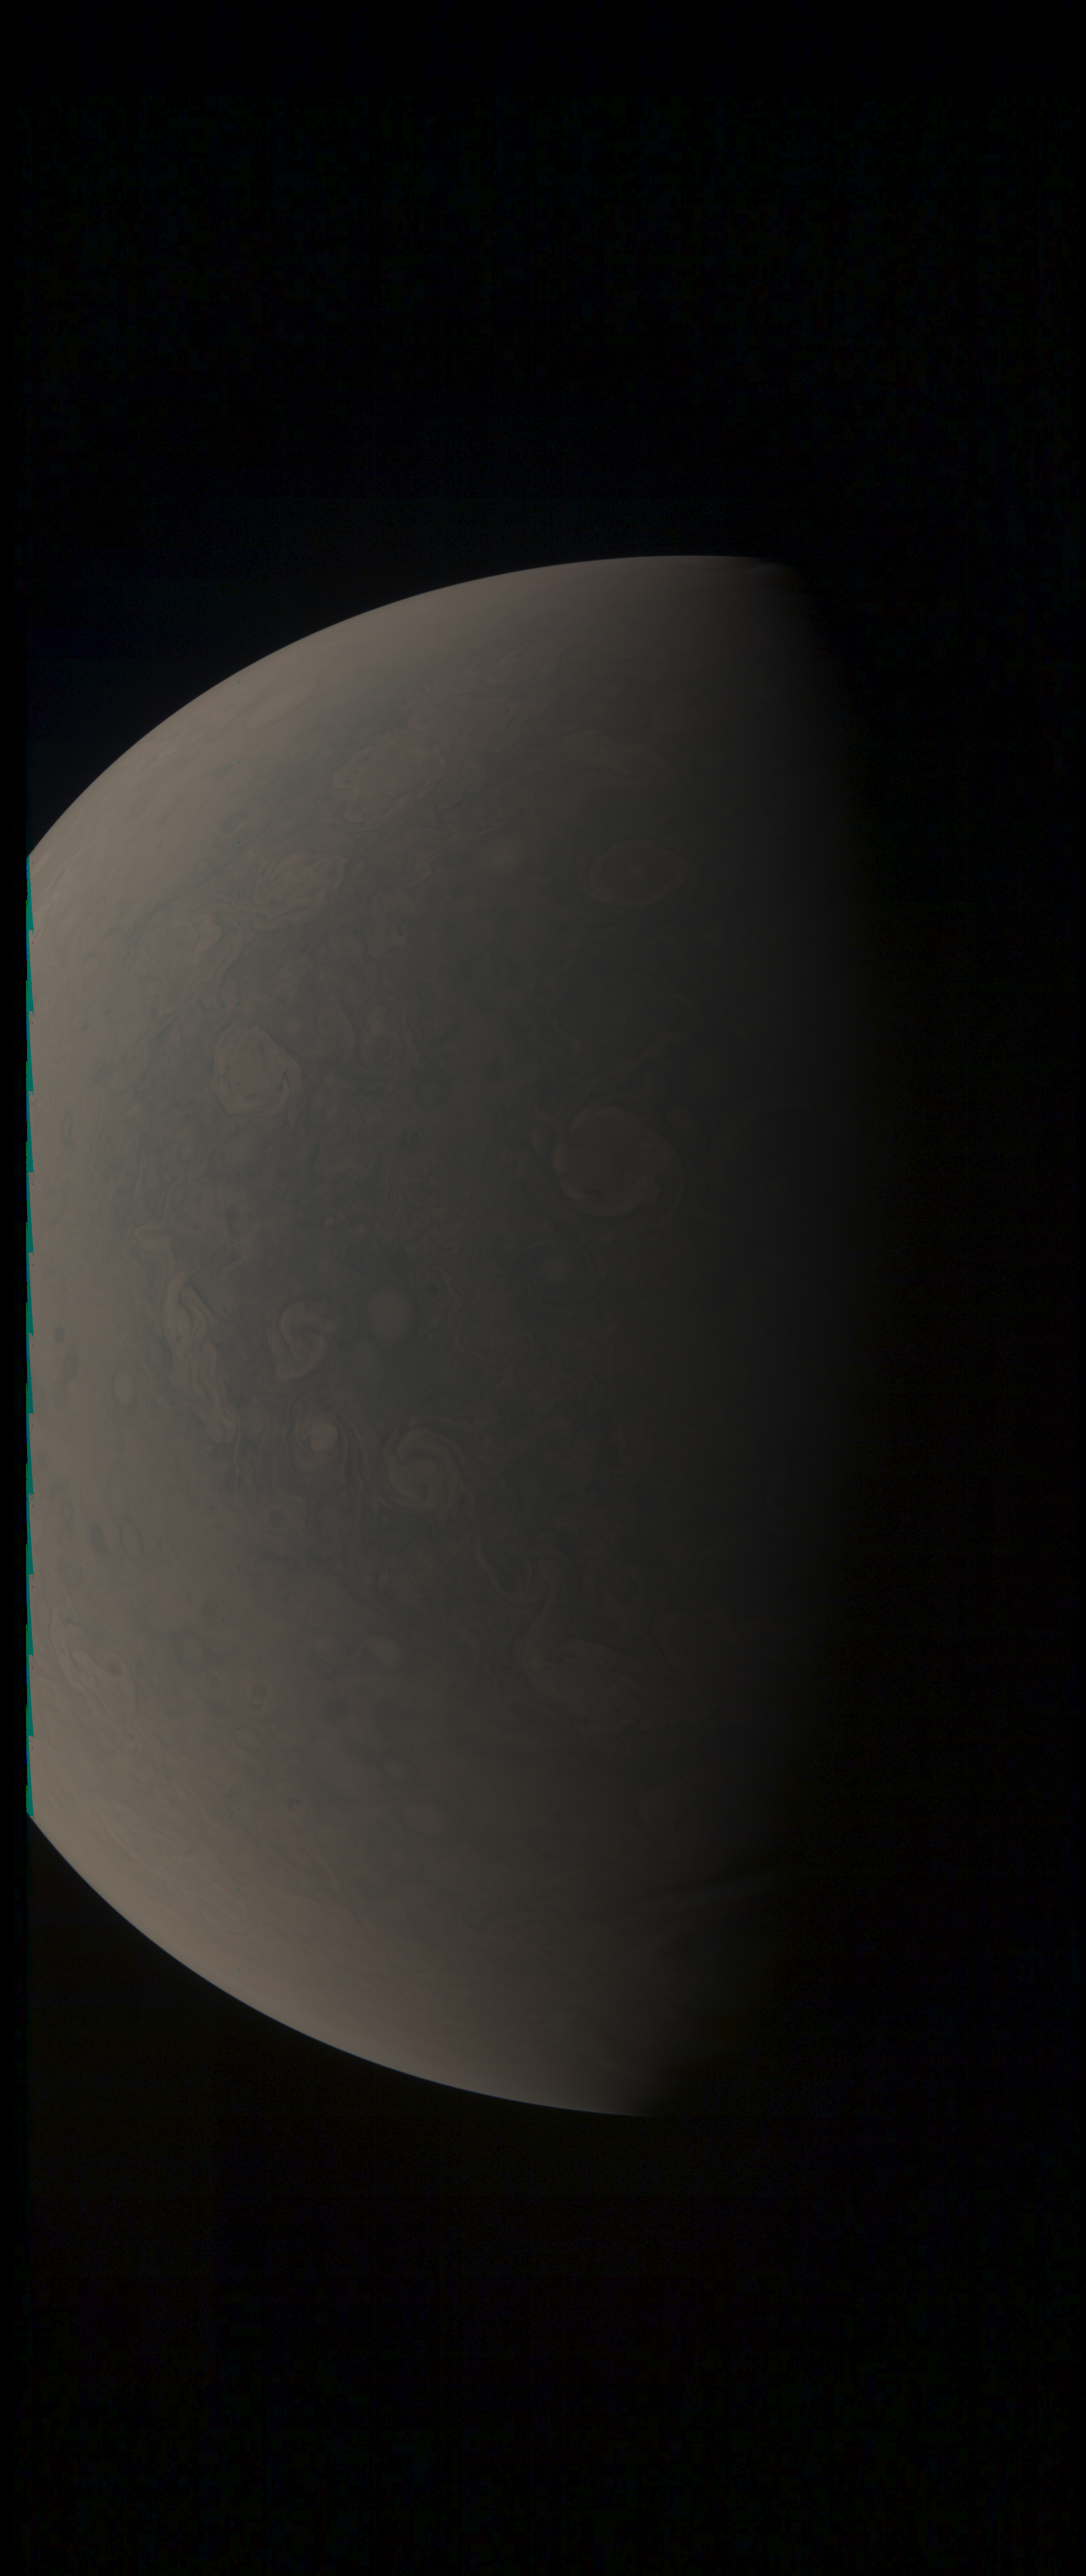 JNCE_2022099_41C00013_V01-raw_proc_hollow_sphere_c_pj_out.BMP_thumbnail_.png